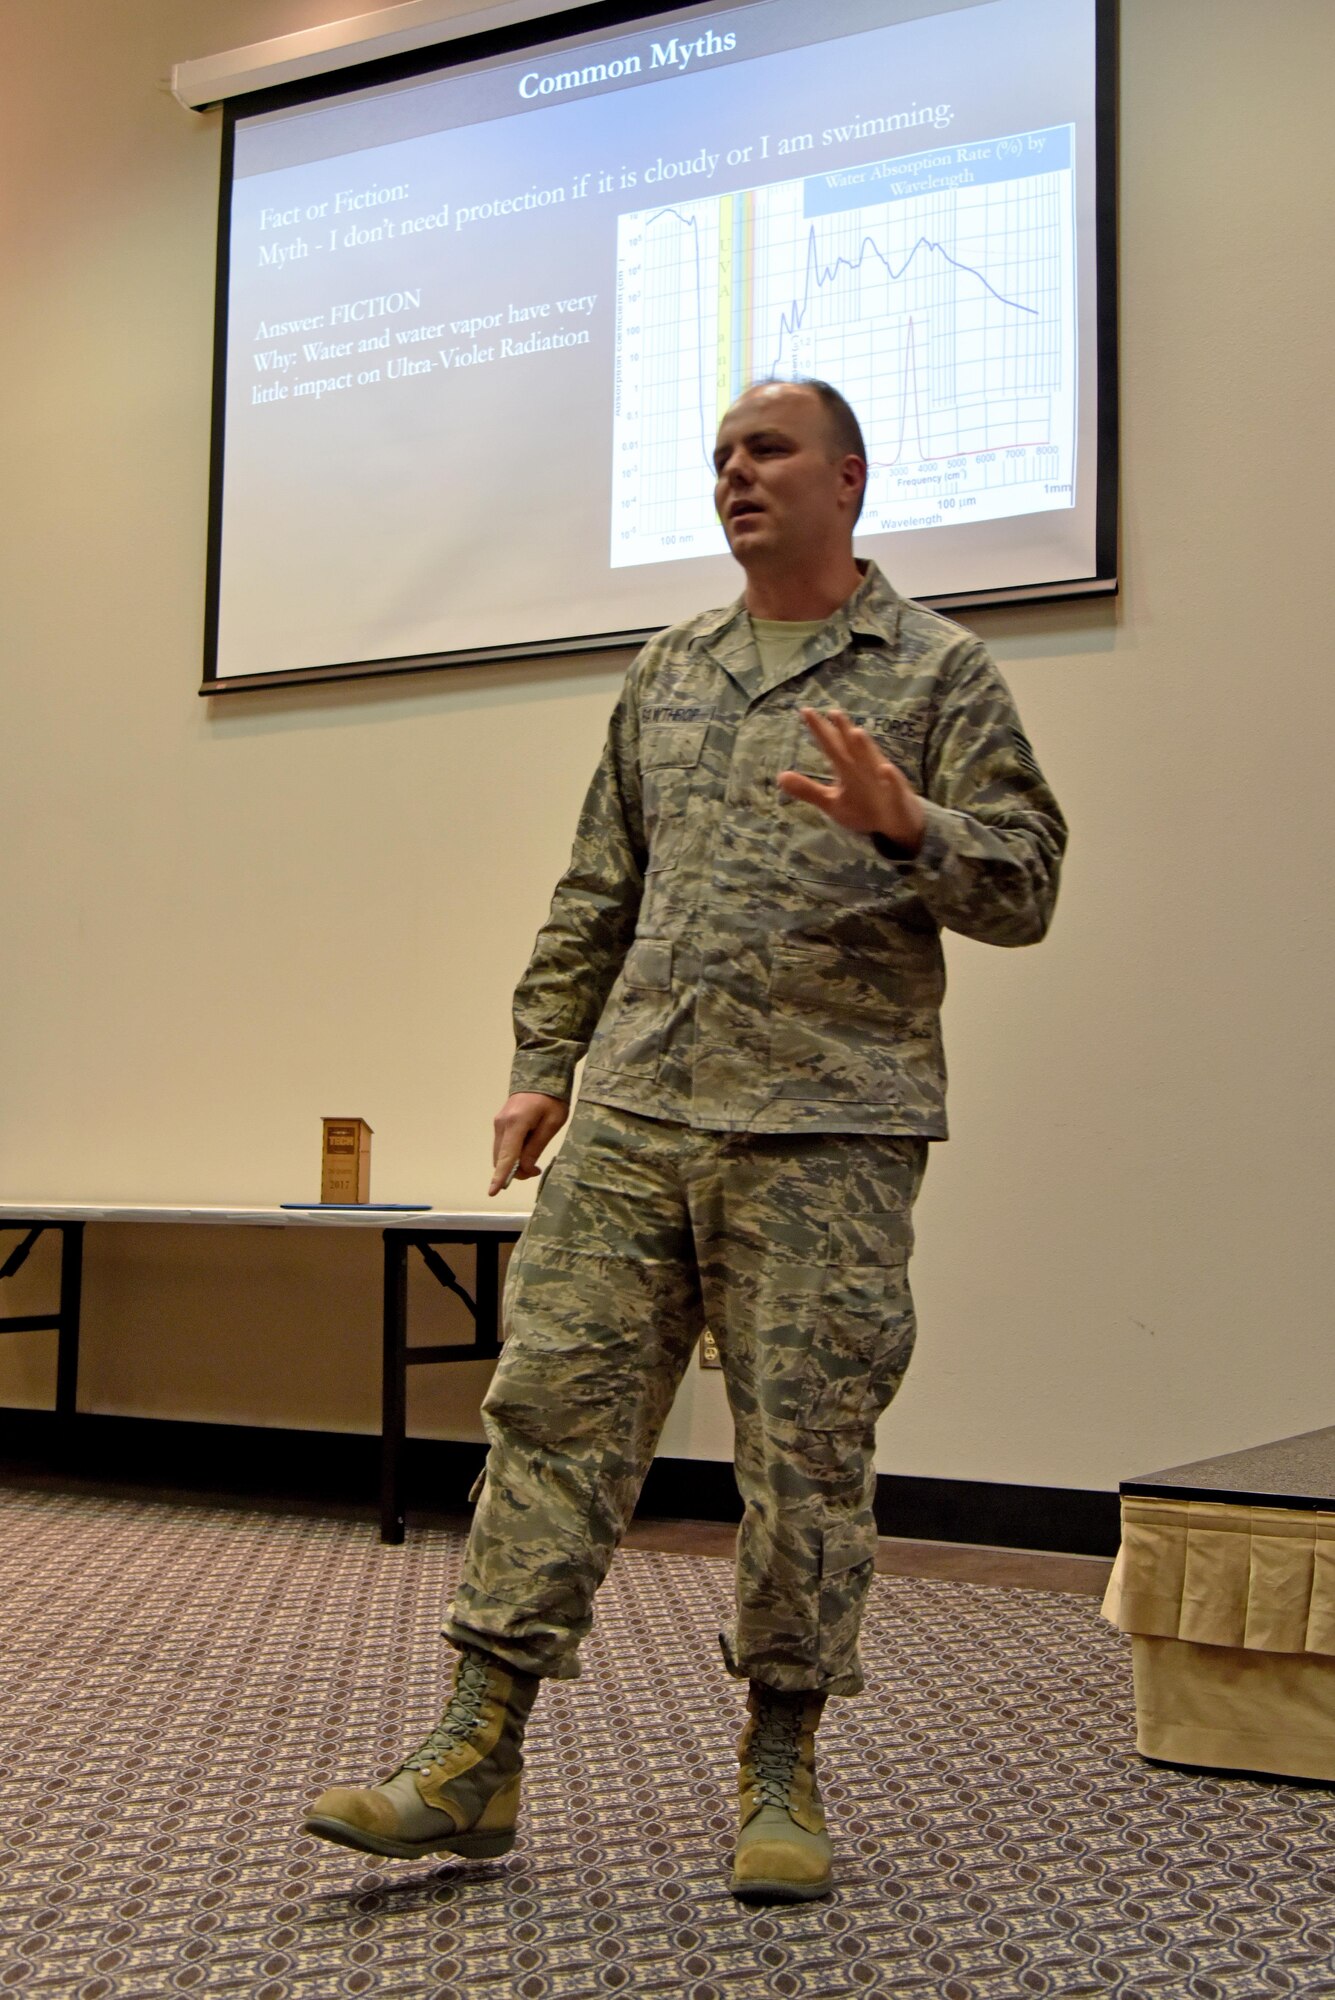 U.S. Air Force Staff. Sgt. Cori Gawthrop, 312th Training Squadron instructor, teaches about sun protection for the Top Tech competition at the Event Center on Goodfellow Air Force Base, Texas, May 5, 2017. During his presentation, he talked about the different ingredients in sunscreen and what they do. During the competition, instructors had to teach a subject and audience members had to demonstrate their understanding of the topic. (U.S. Air Force photo by Staff Sgt. Joshua Edwards/Released)